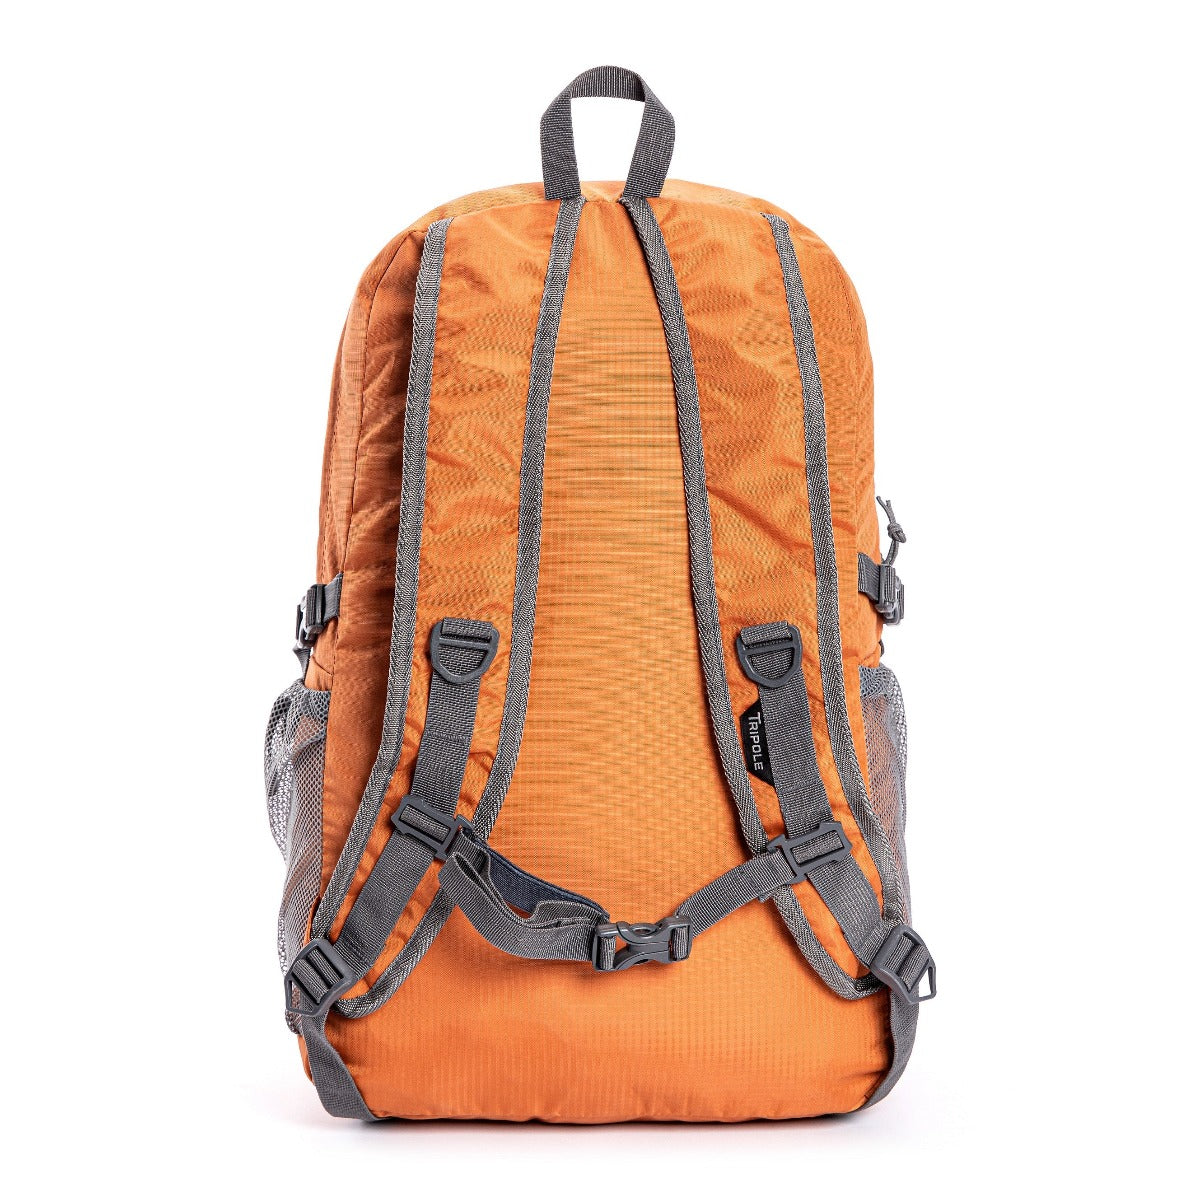 Foldable PAKEASY Backpack and Day Bag for Hiking and Day Trips - Orange 4